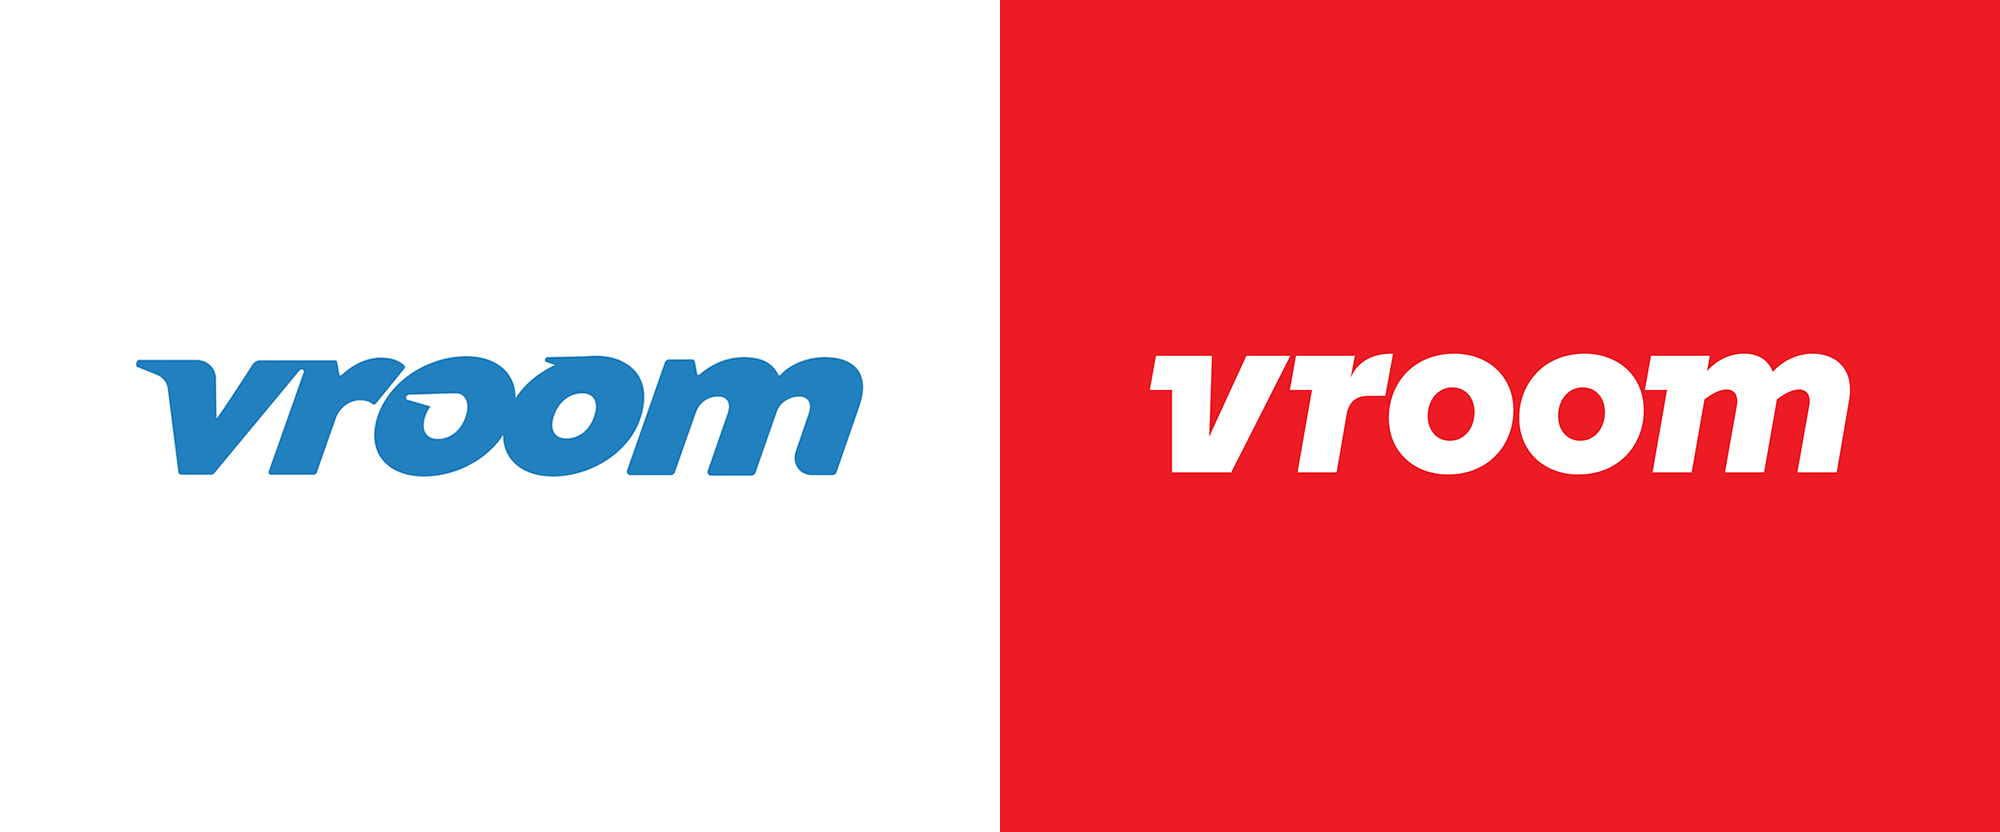 New Logo and Identity for Vroom by Pentagram